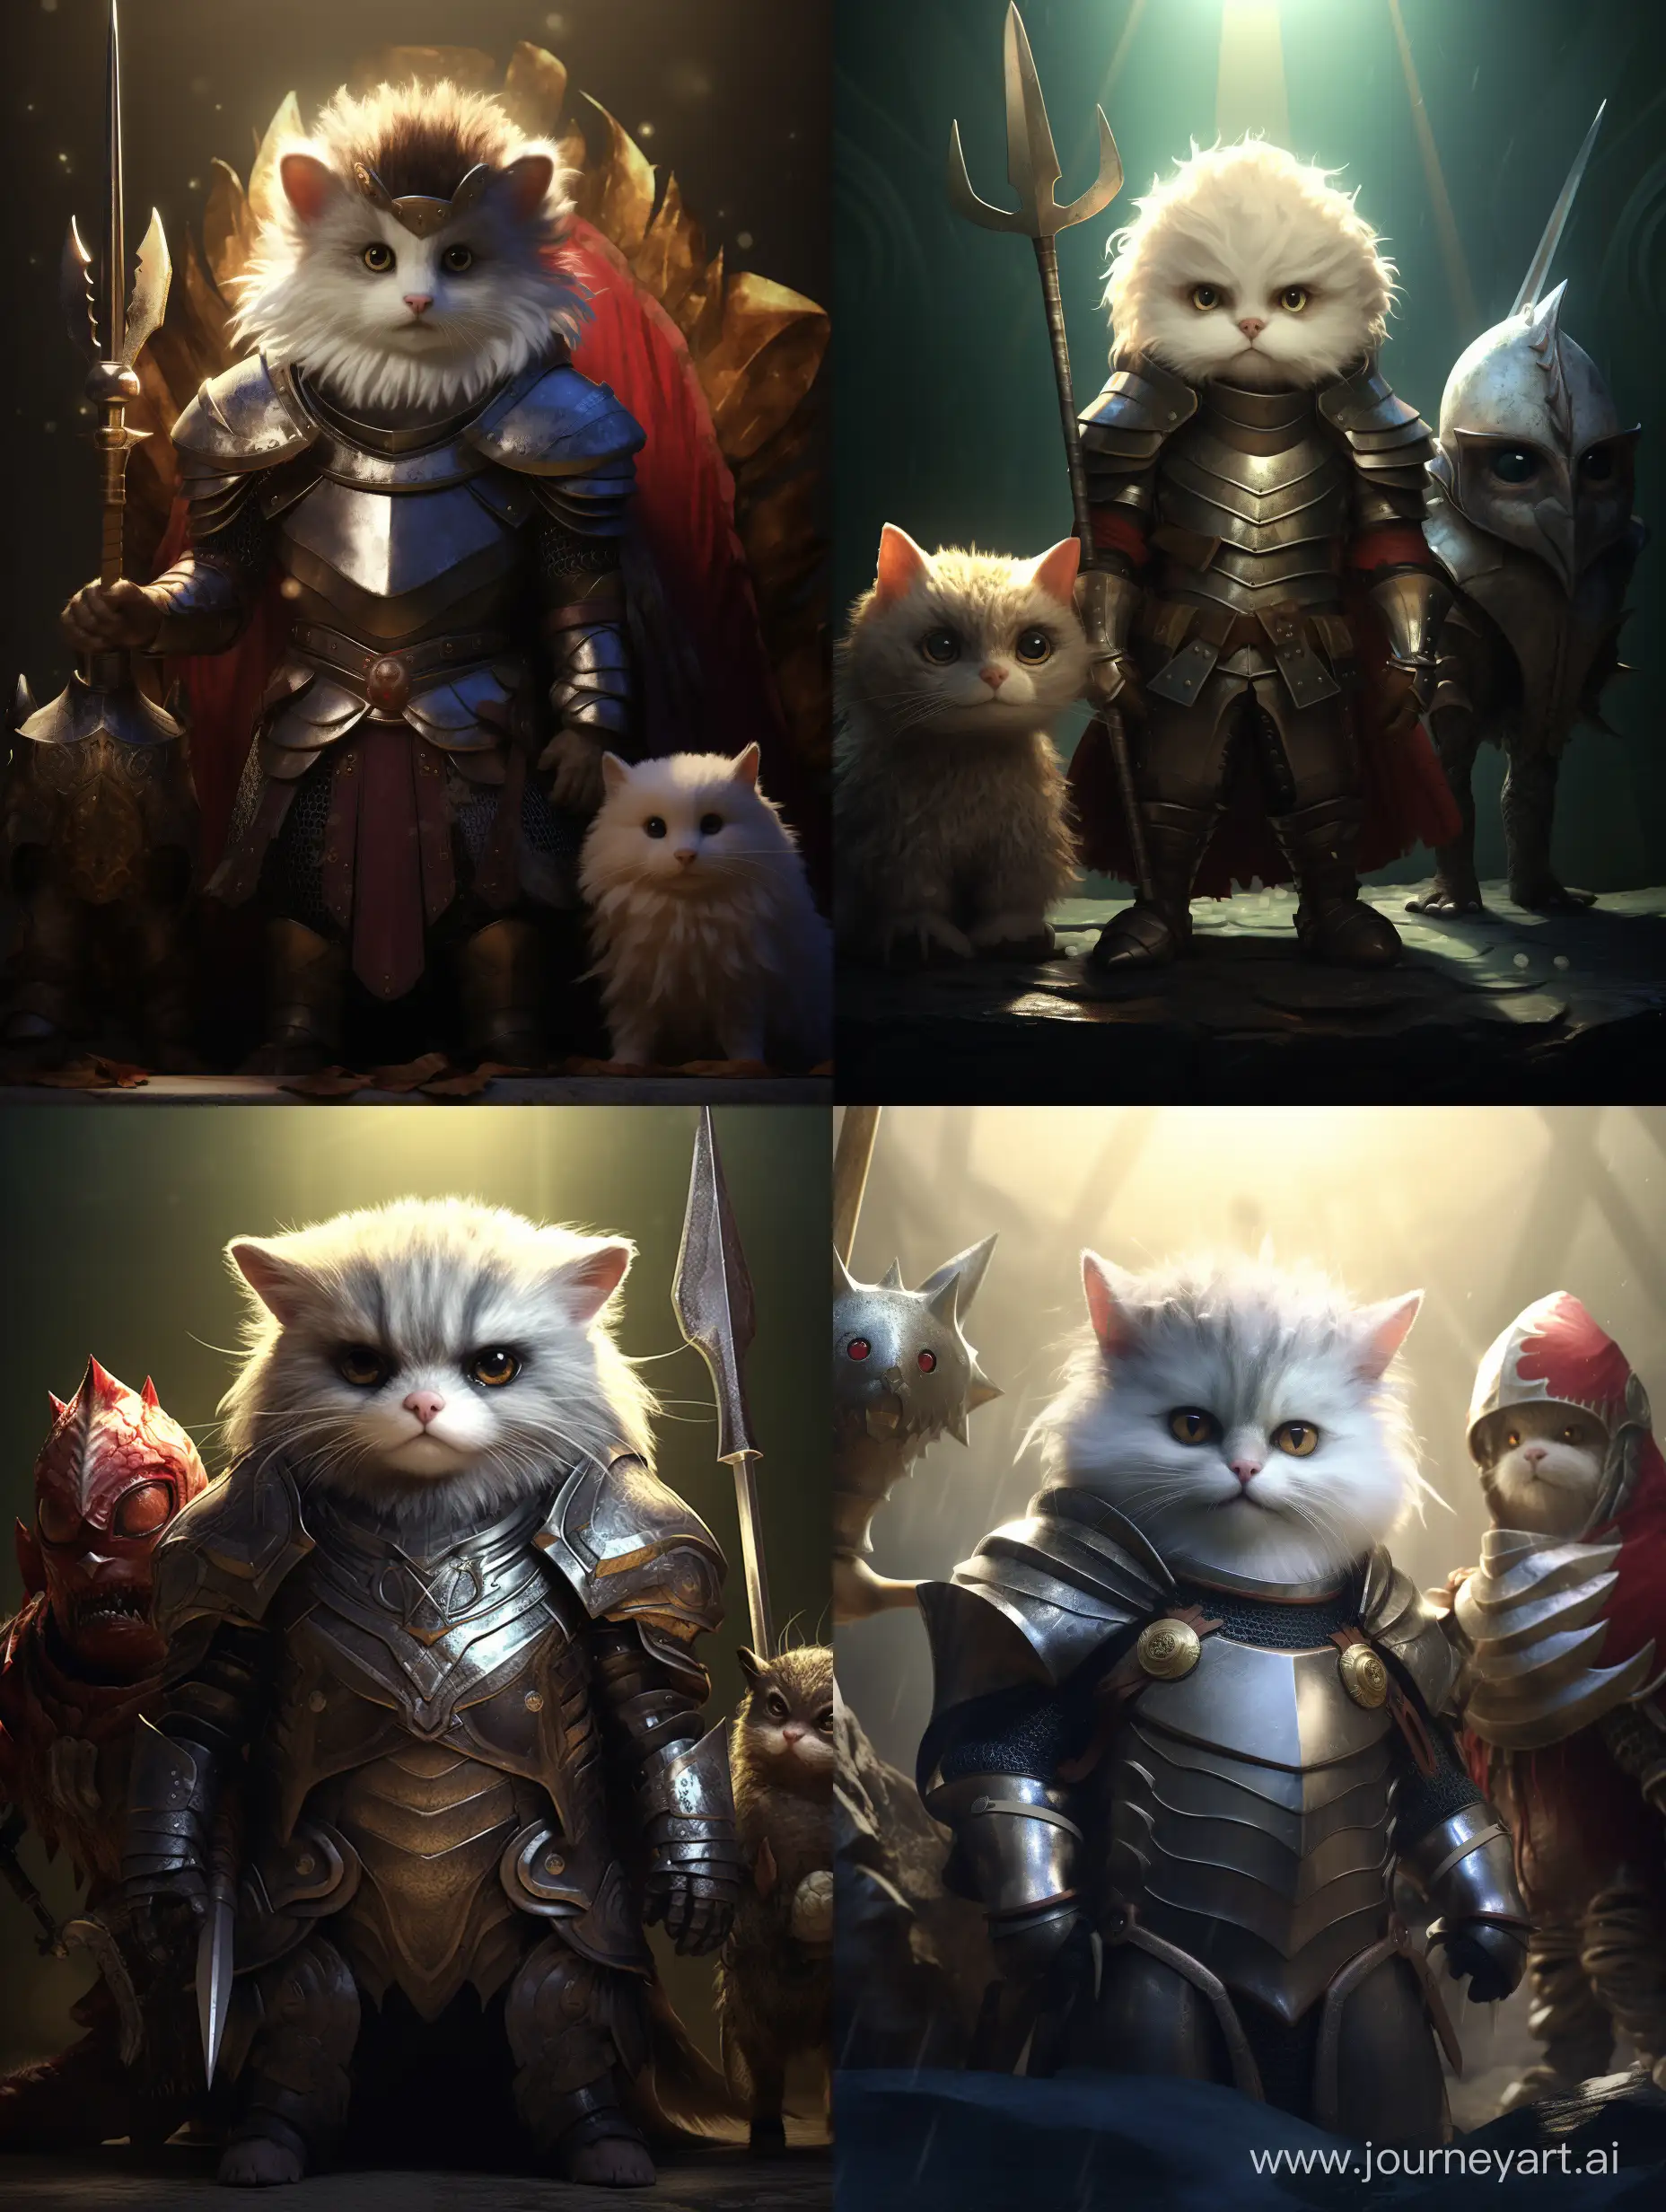 A knight cat in shark skin armor, a little hedgehog and a cute goose against an evil shadow